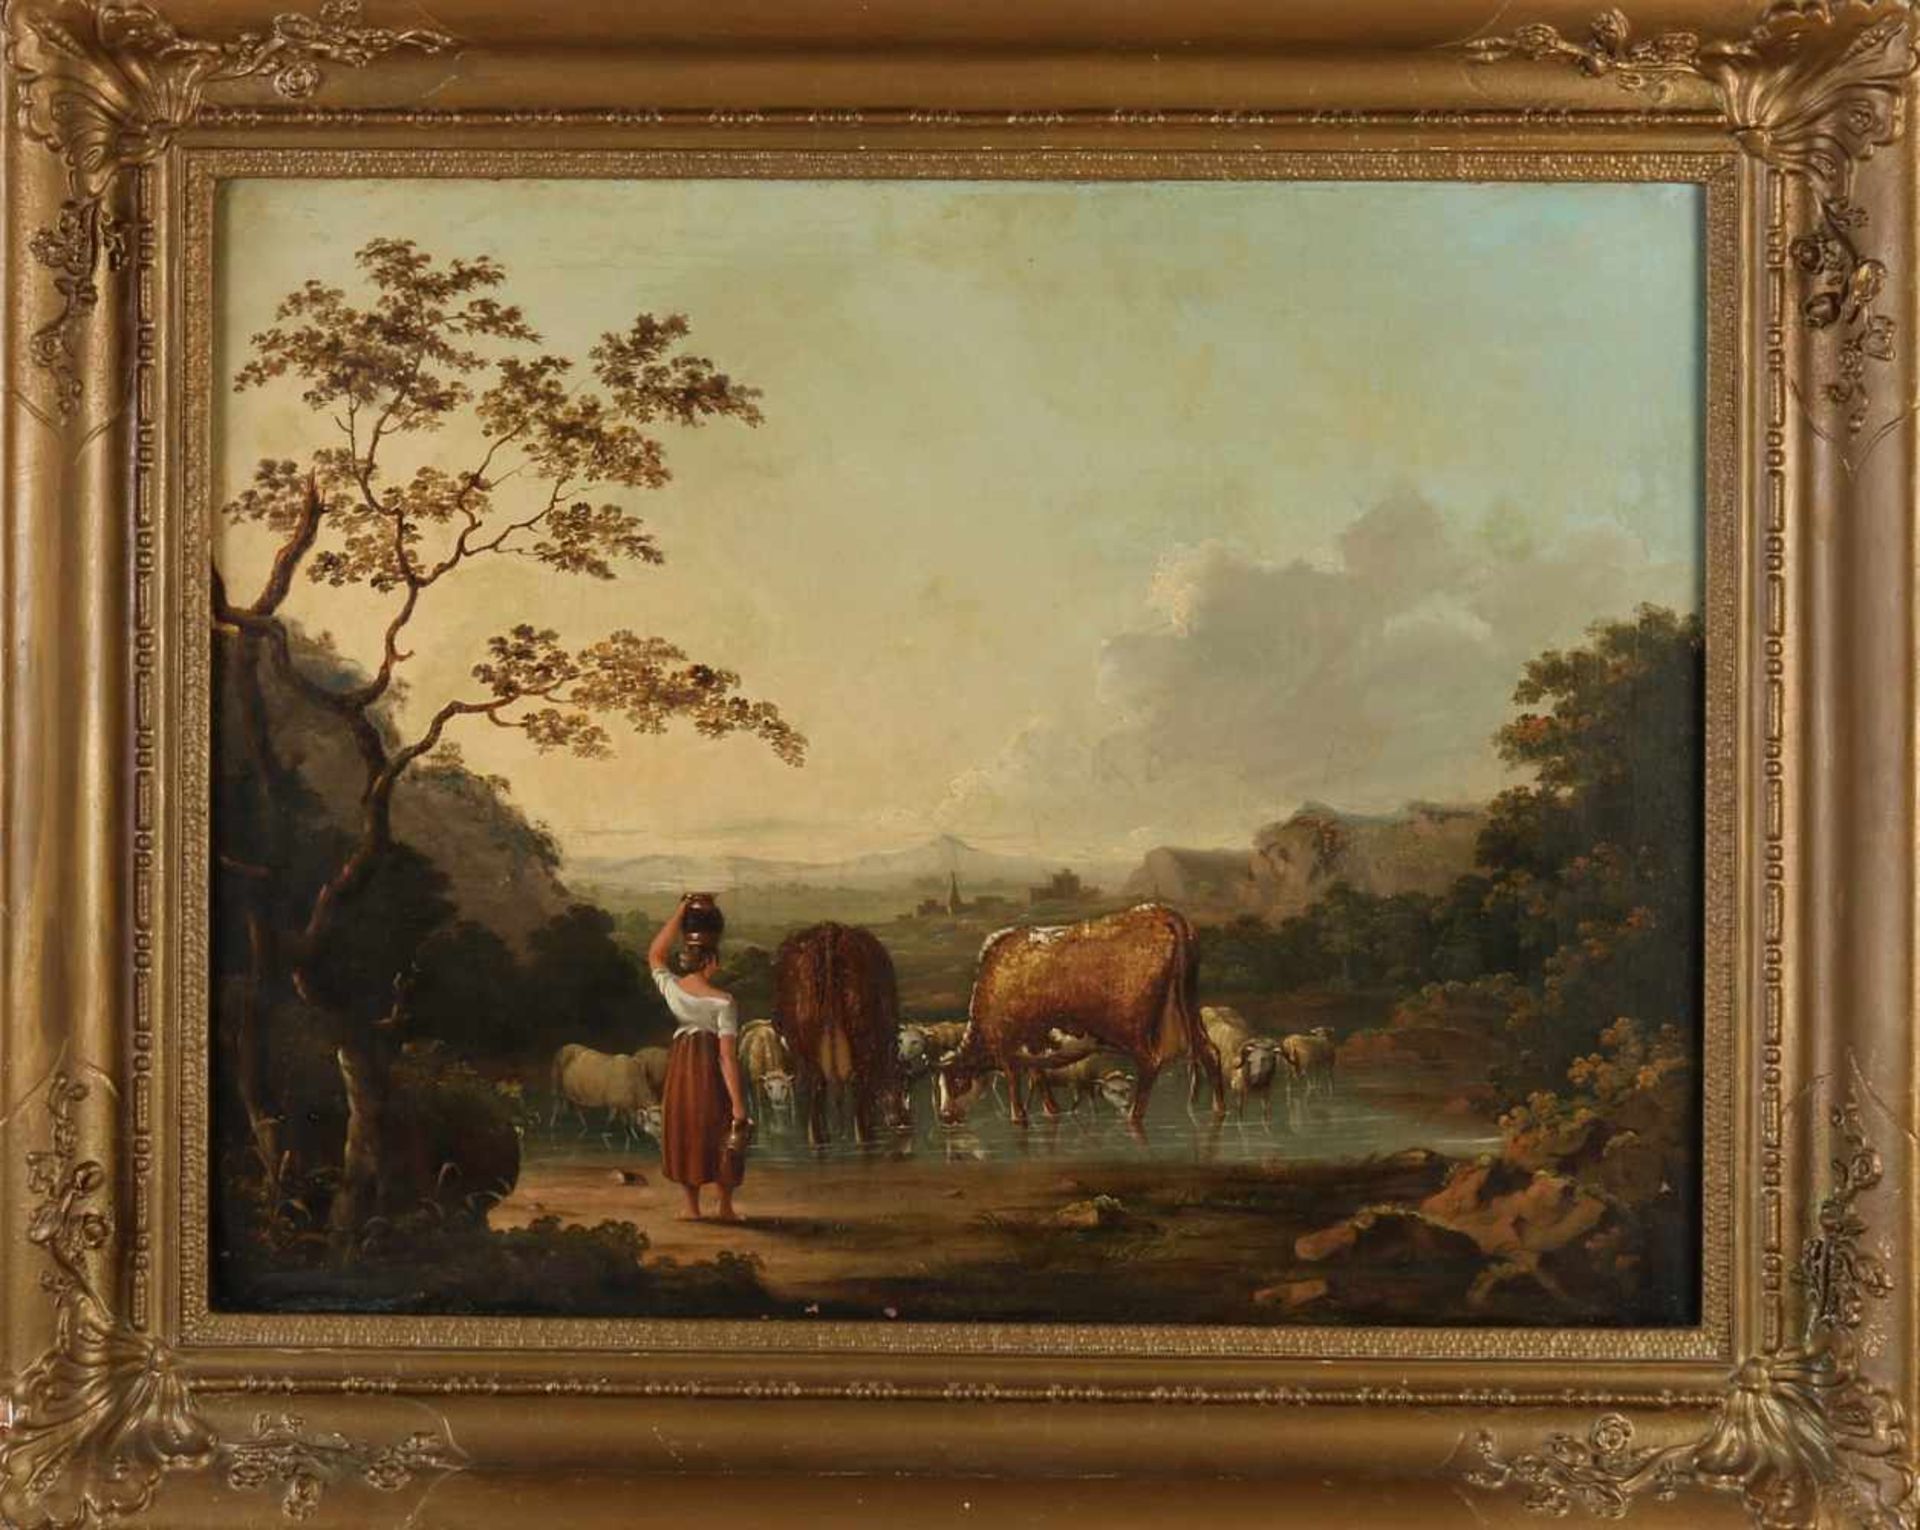 Unsigned? Circa 1800. Two landscapes. Berg rural landscapes with cattle and figures. Oil on linen.